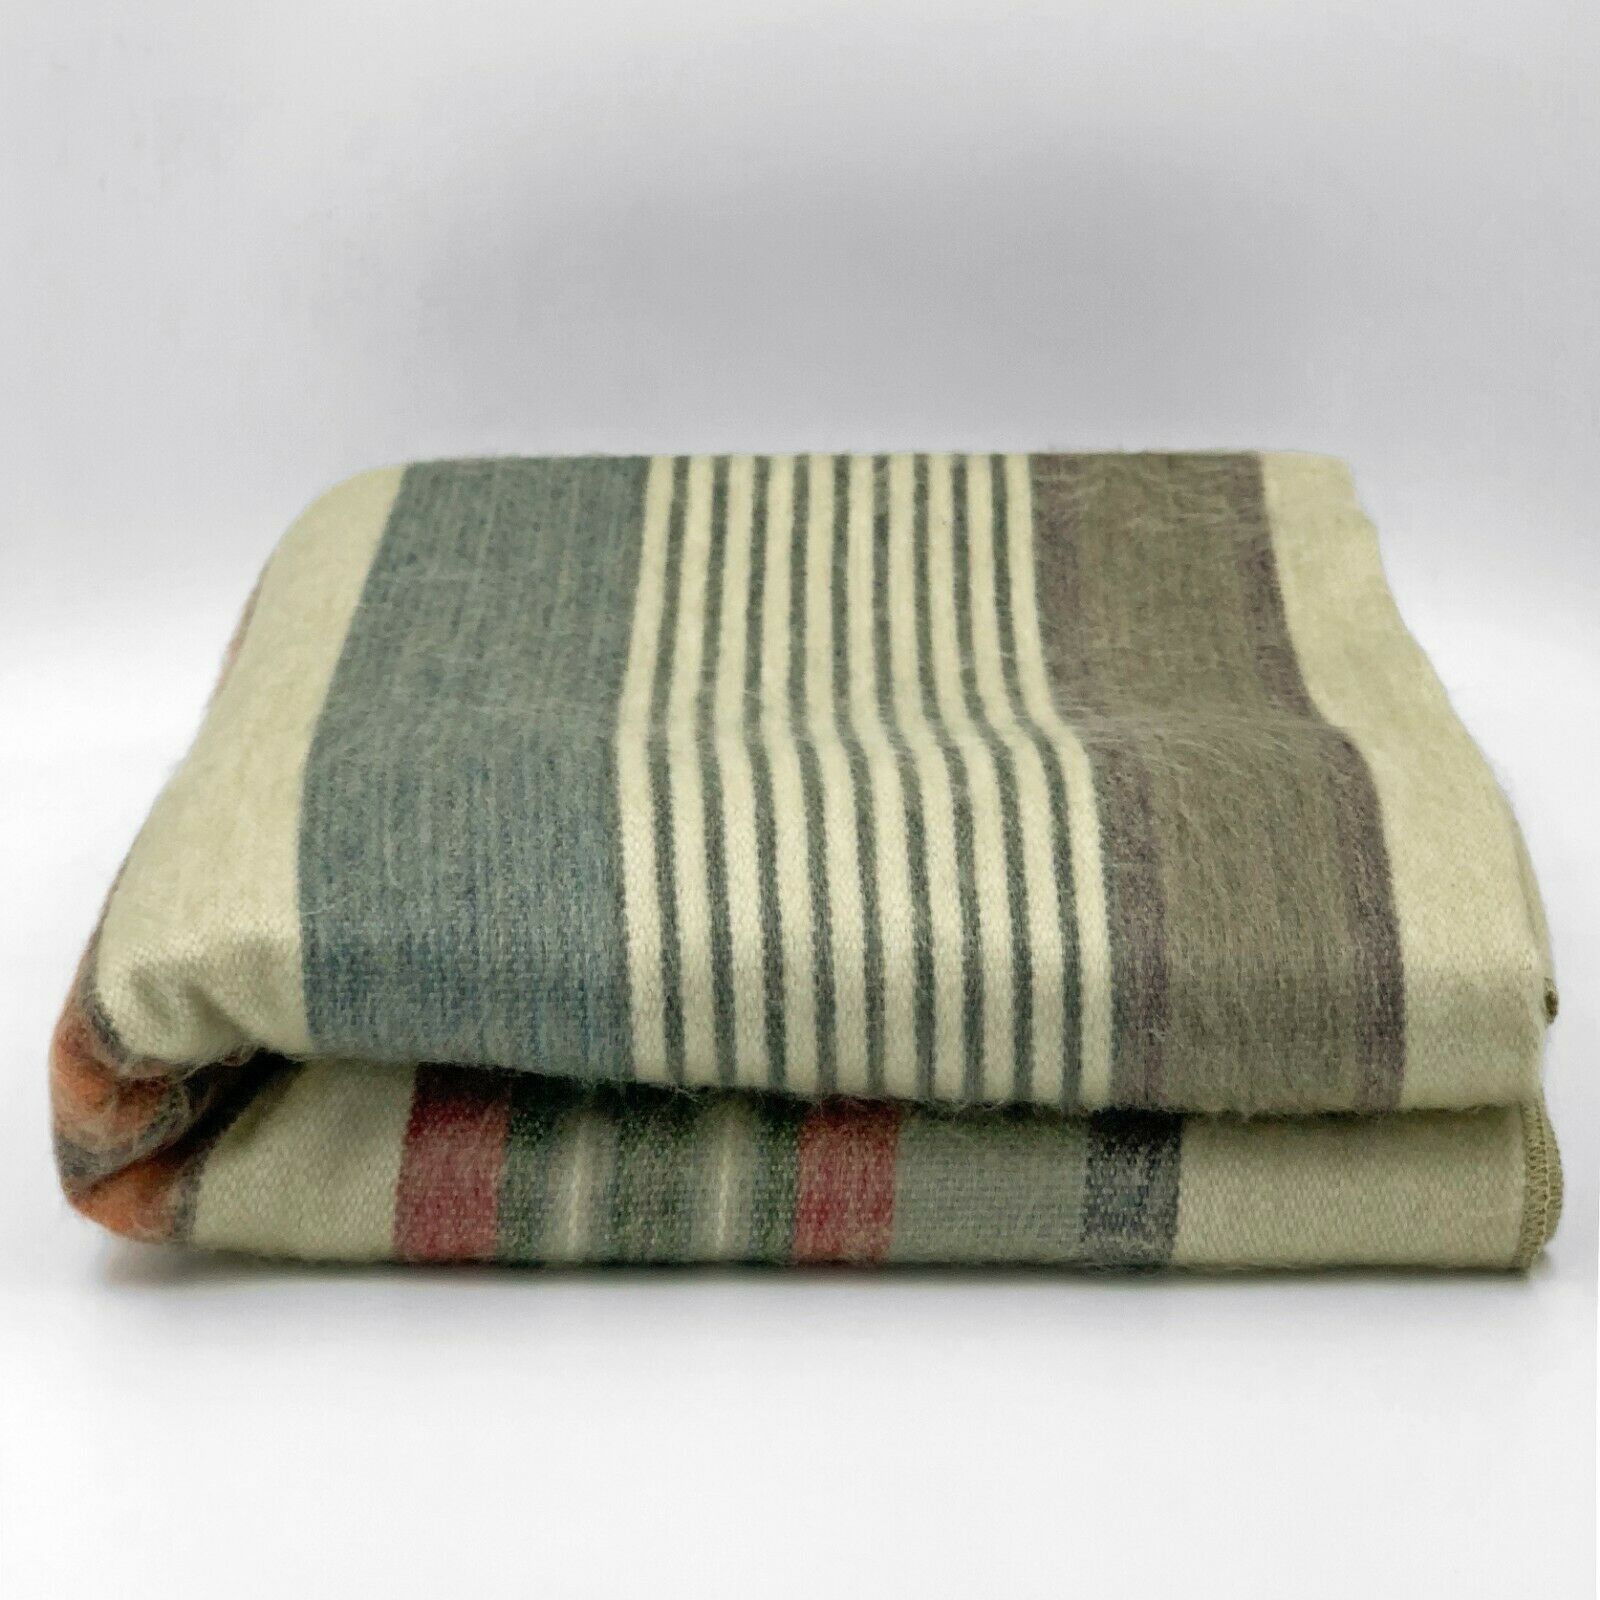 Suropata - Baby Alpaca Wool Throw Blanket / Sofa Cover - Queen 96" x 67" - multi colored stripes pattern